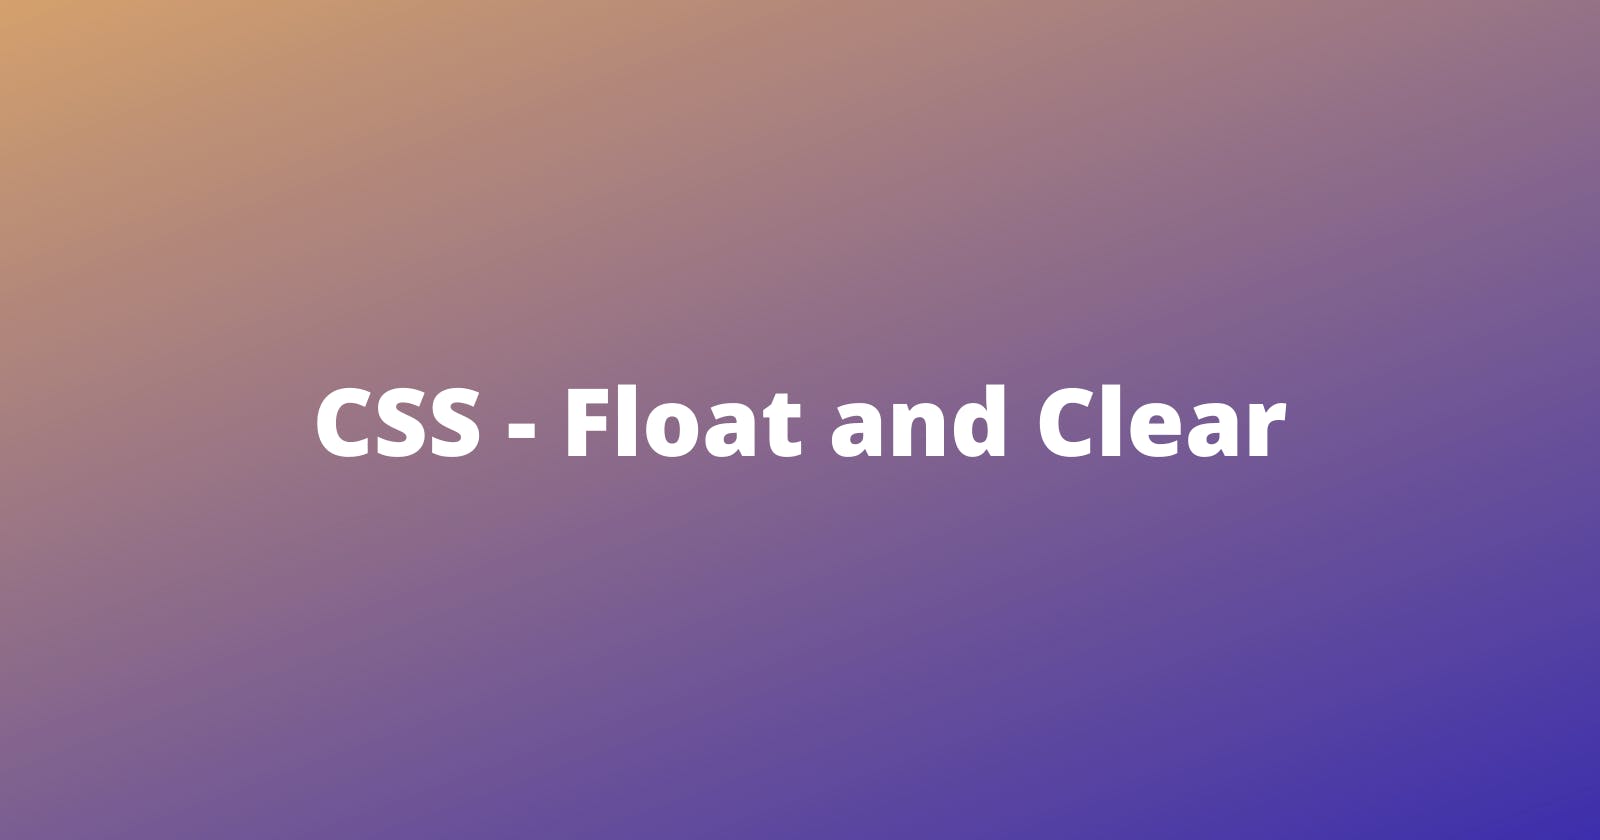 CSS - Float and Clear